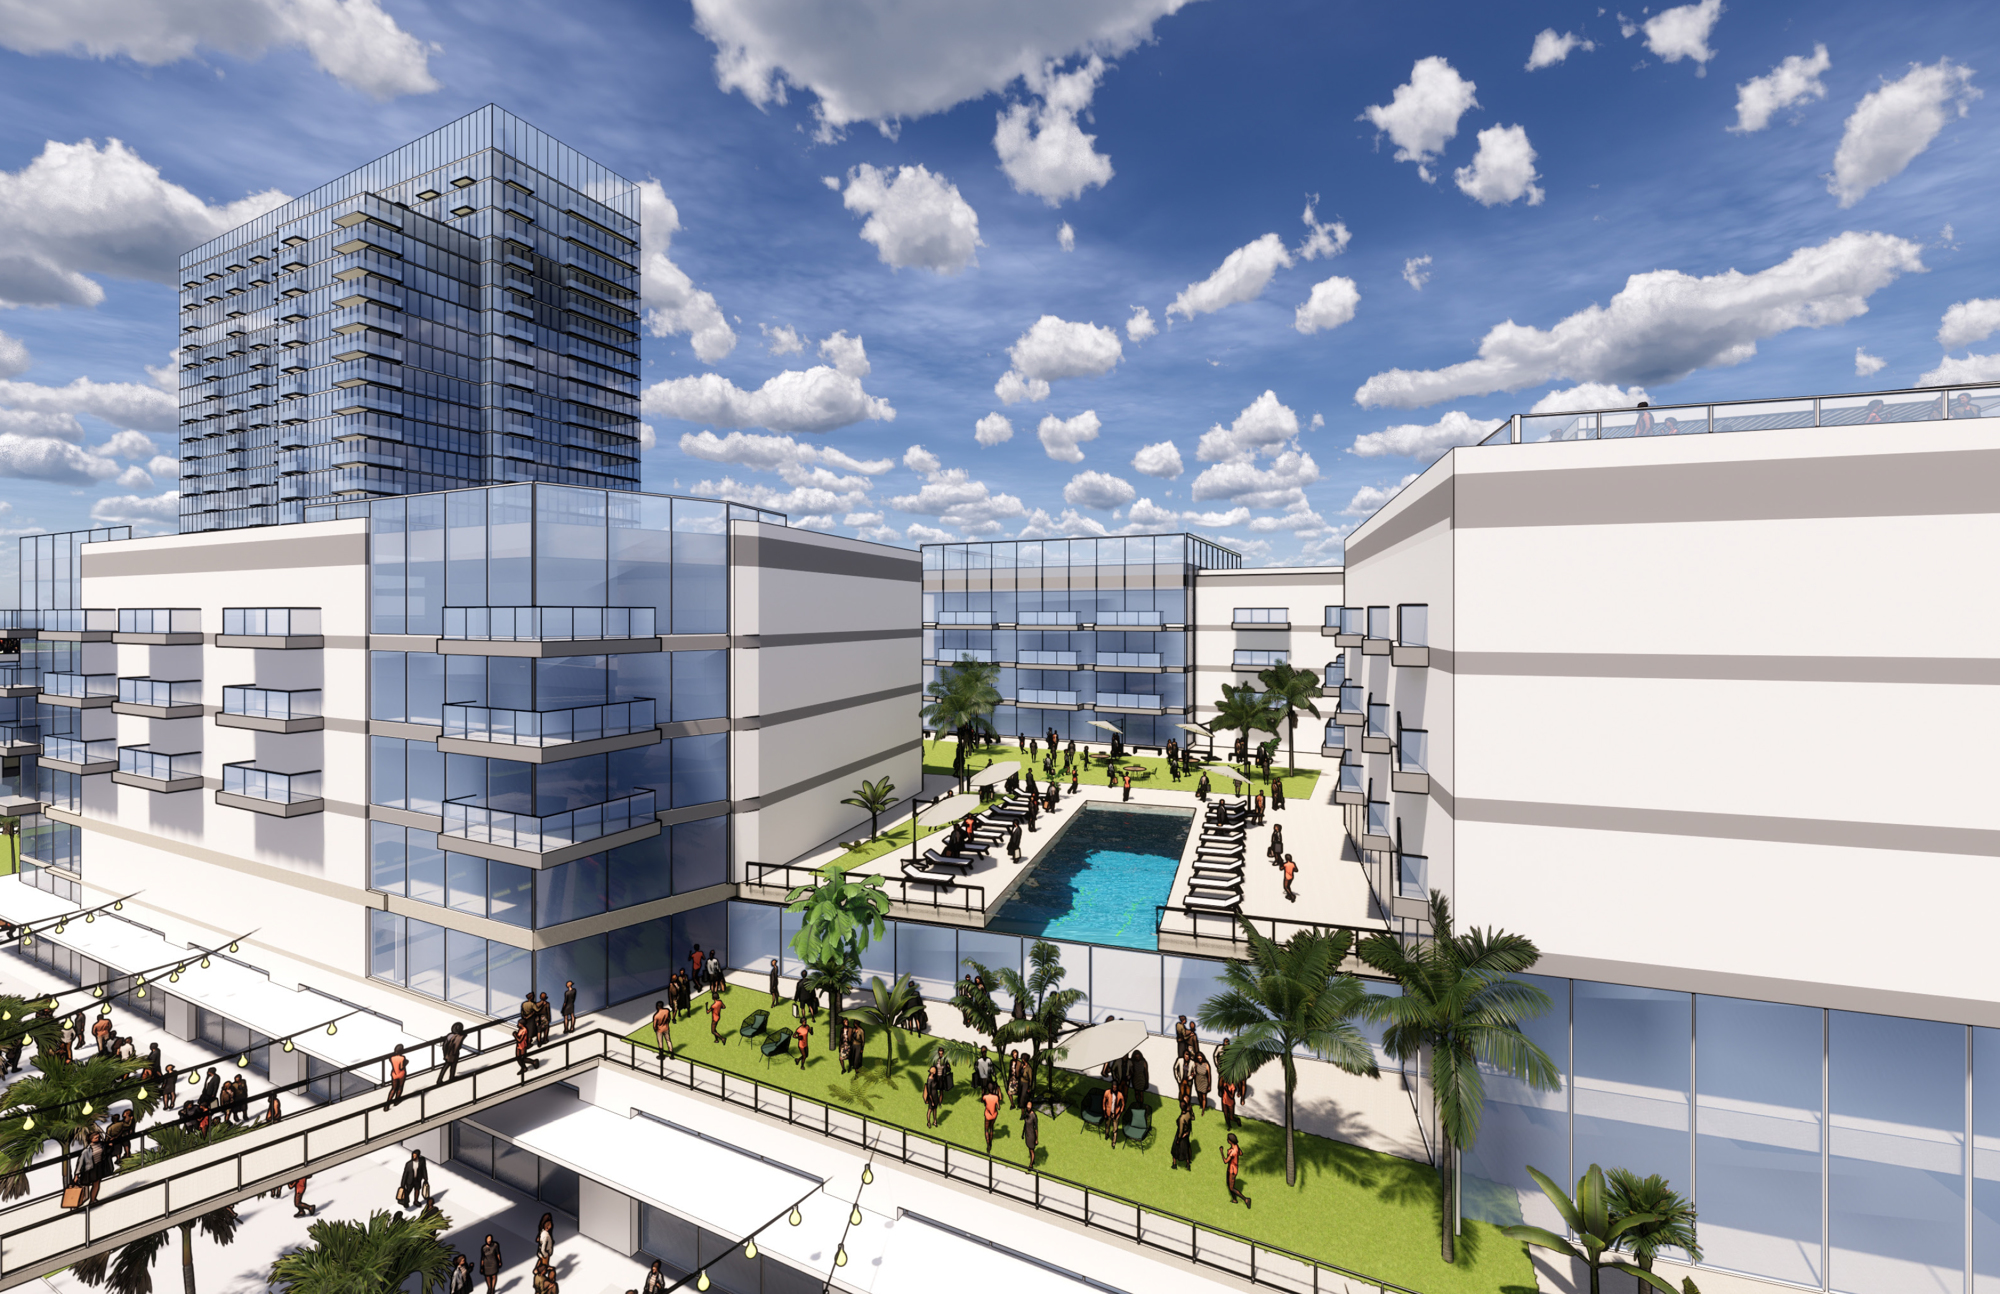 The Lot J development includes two apartment buildings, a hotel and office space.